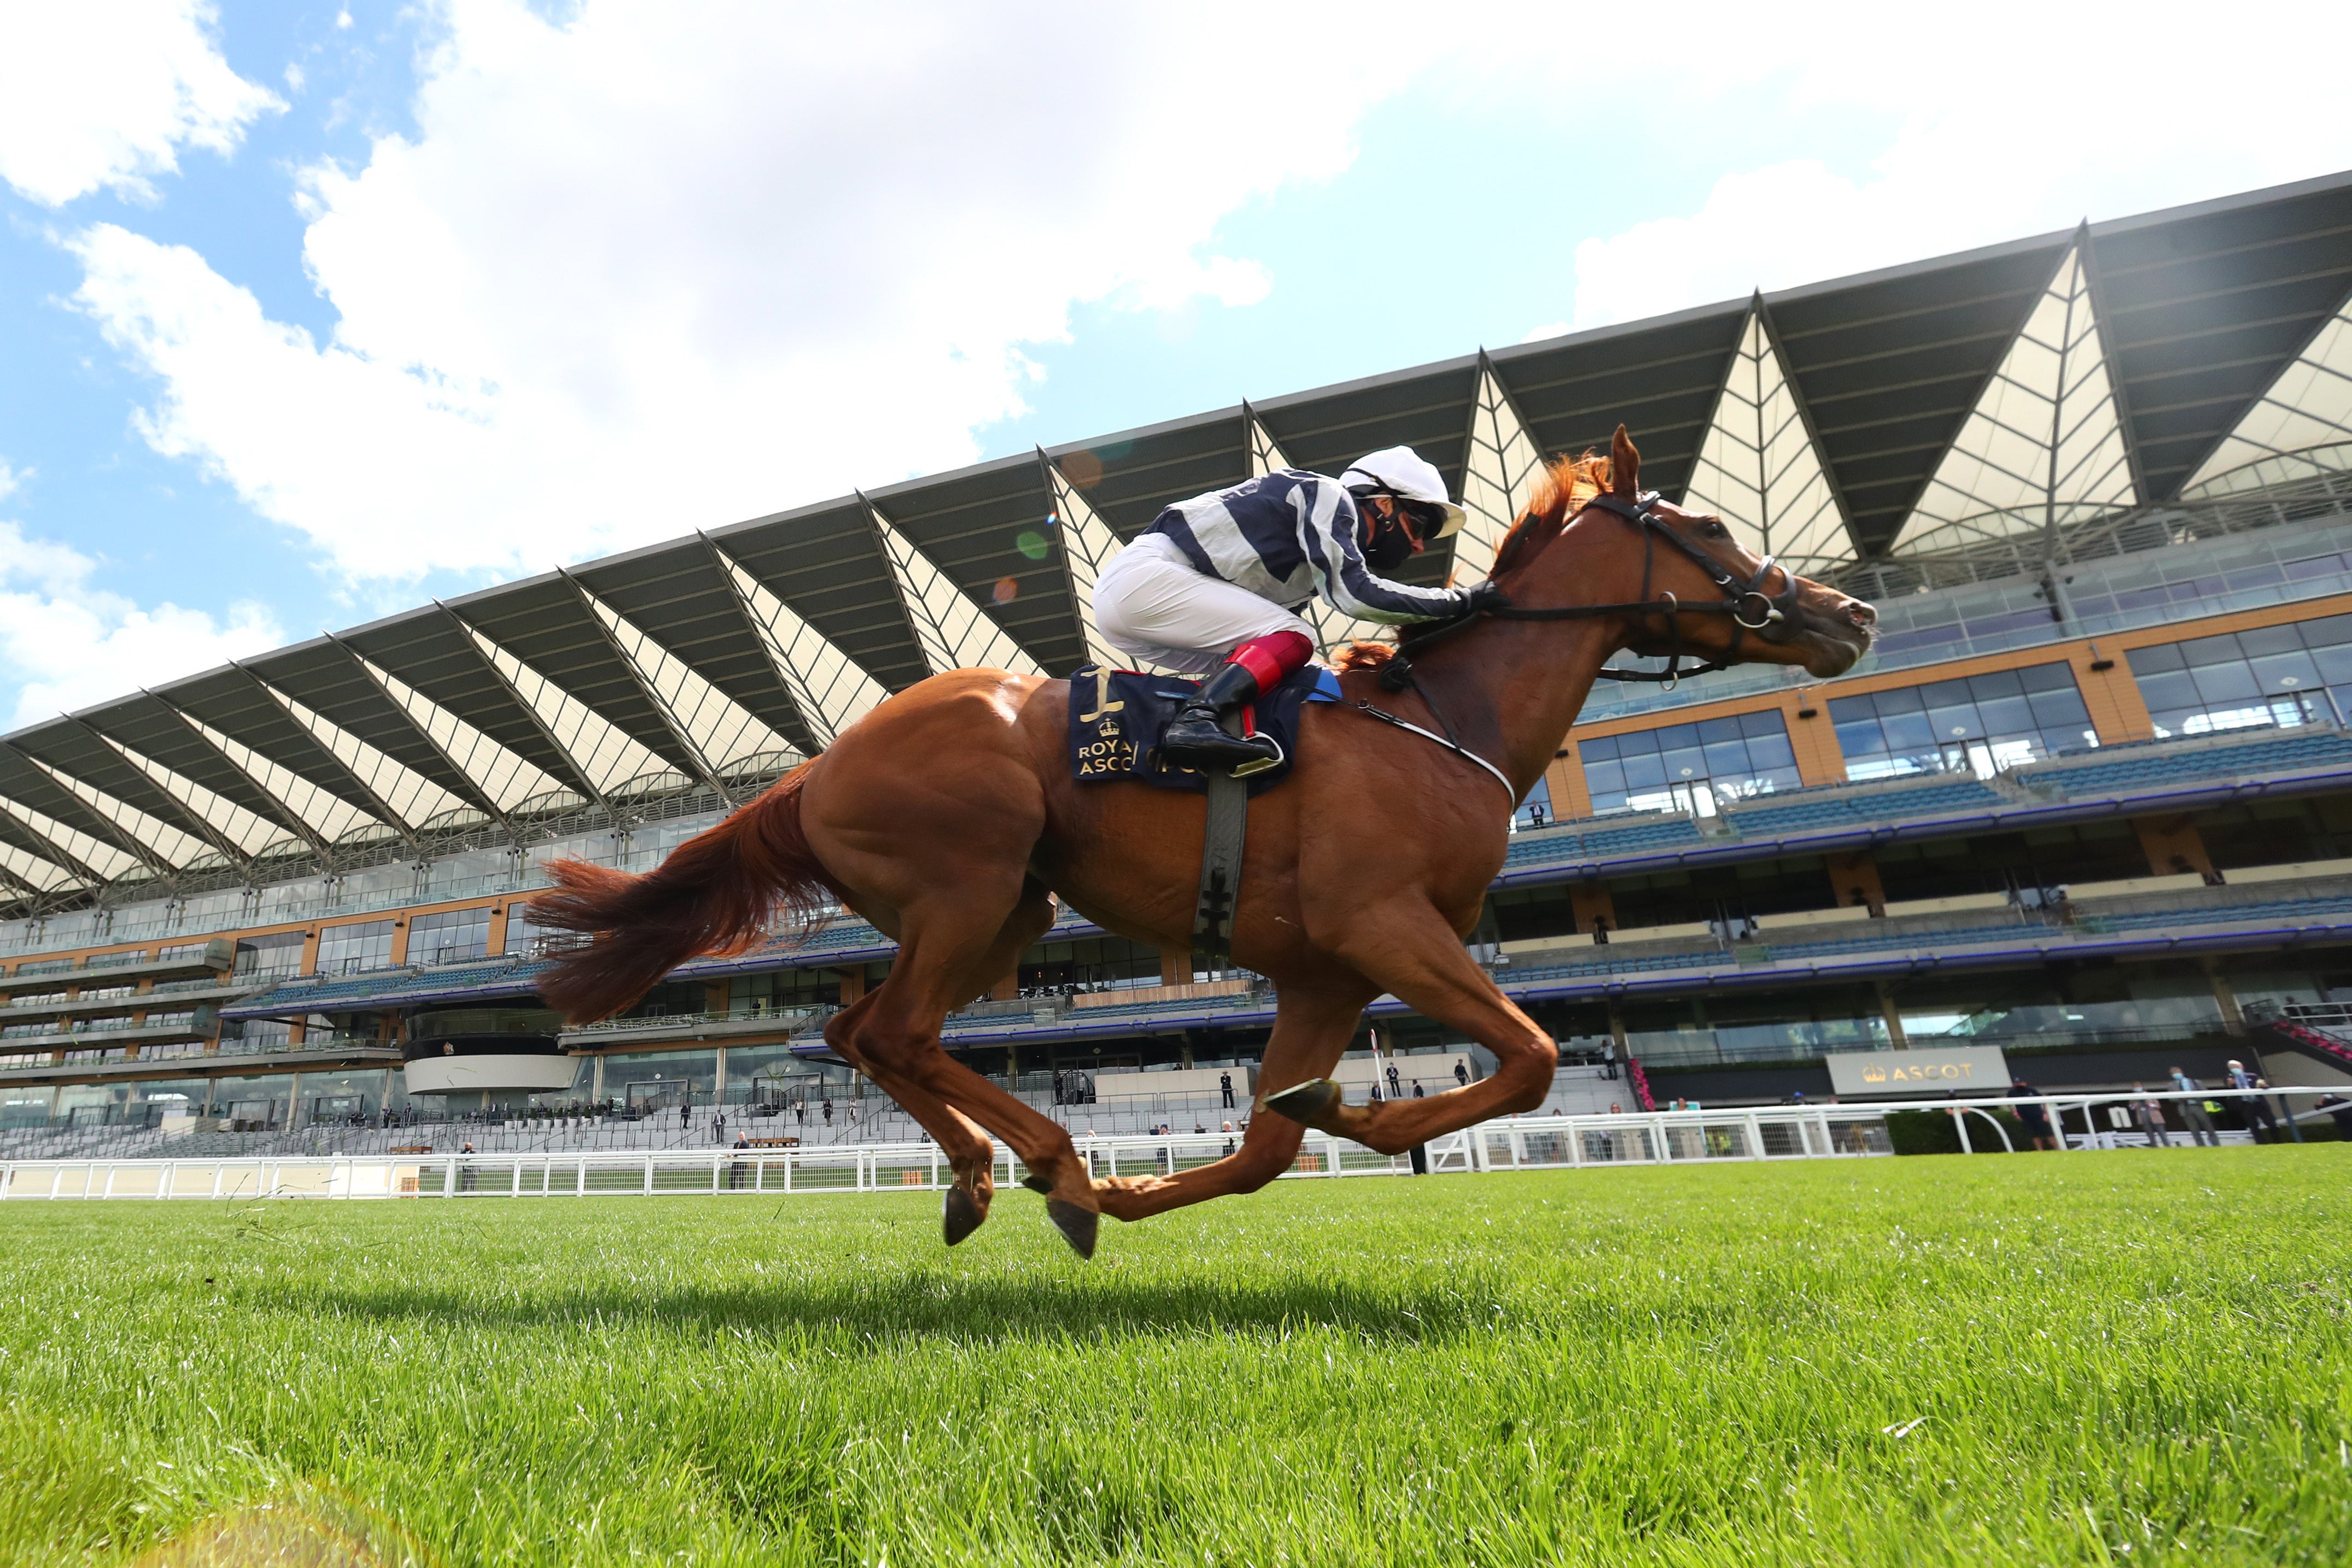 Royal Ascot will take place - with a crowd of 12,000 back this year - from June 15-19